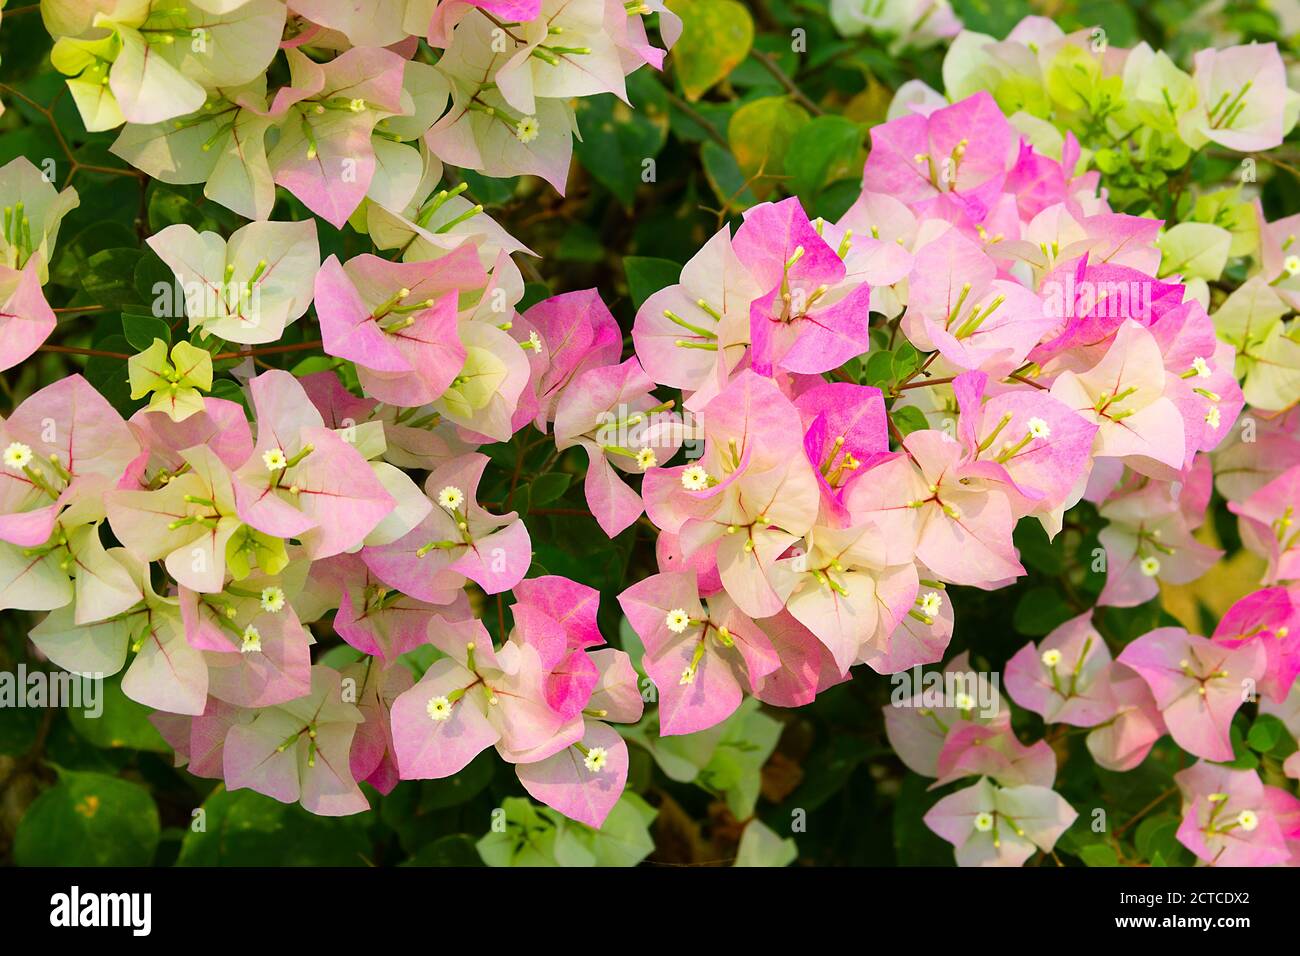 Bougainvillea - (Bougainvillea ) is beautiful flowering perennial plant that delights with its appearance. Stock Photo